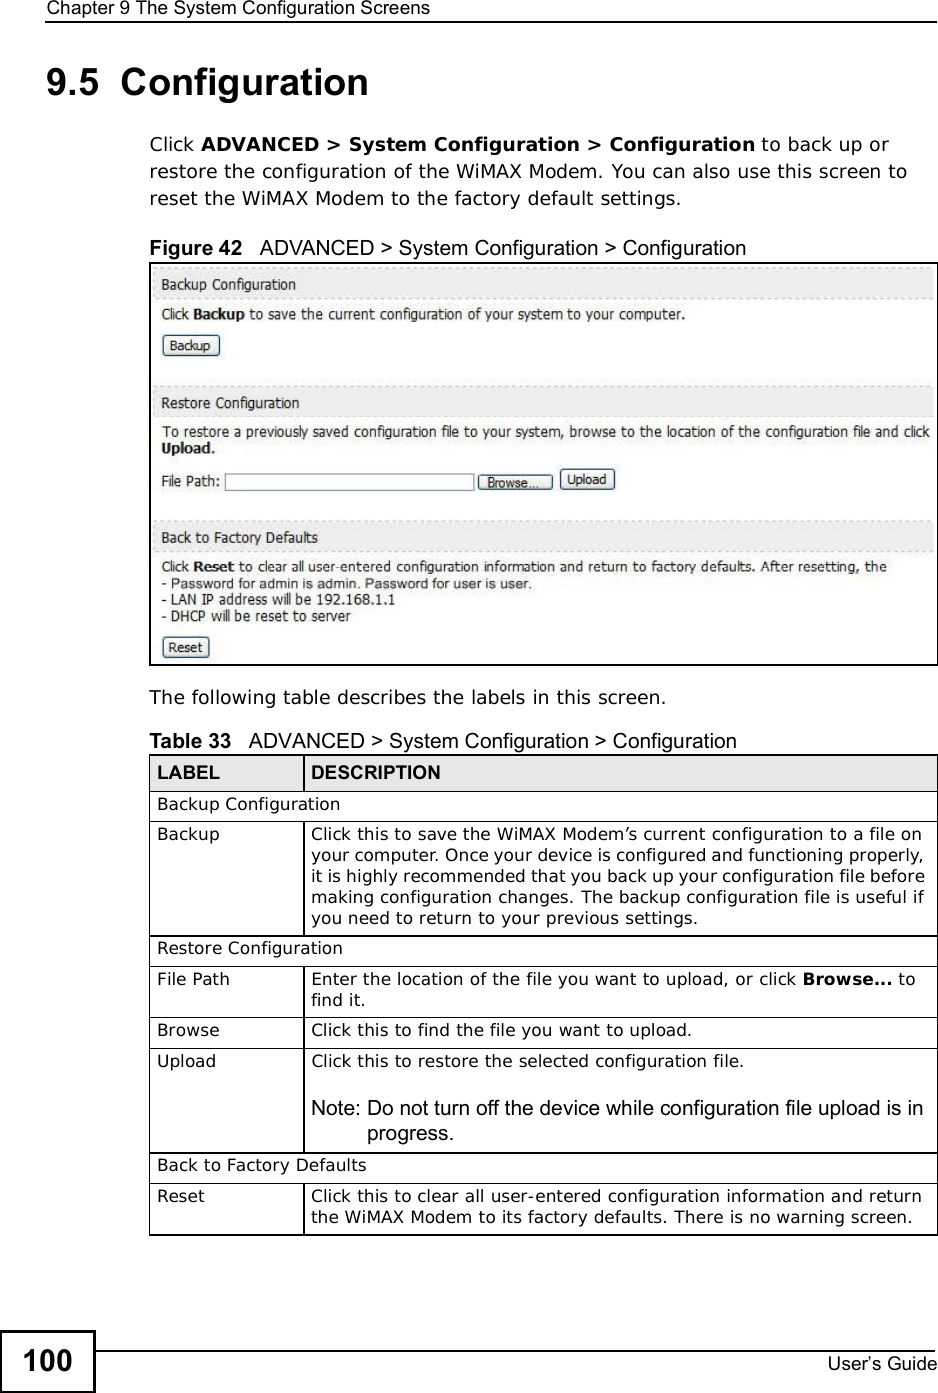 Chapter 9The System Configuration ScreensUser s Guide1009.5  ConfigurationClick ADVANCED &gt; System Configuration &gt; Configuration to back up or restore the configuration of the WiMAX Modem. You can also use this screen to reset the WiMAX Modem to the factory default settings.Figure 42   ADVANCED &gt; System Configuration &gt; ConfigurationThe following table describes the labels in this screen.  Table 33   ADVANCED &gt; System Configuration &gt; ConfigurationLABEL DESCRIPTIONBackup ConfigurationBackup Click this to save the WiMAX Modem’s current configuration to a file on your computer. Once your device is configured and functioning properly, it is highly recommended that you back up your configuration file before making configuration changes. The backup configuration file is useful if you need to return to your previous settings.Restore ConfigurationFile PathEnter the location of the file you want to upload, or click Browse... to find it.BrowseClick this to find the file you want to upload.UploadClick this to restore the selected configuration file.Note: Do not turn off the device while configuration file upload is in progress.Back to Factory DefaultsReset Click this to clear all user-entered configuration information and return the WiMAX Modem to its factory defaults. There is no warning screen.